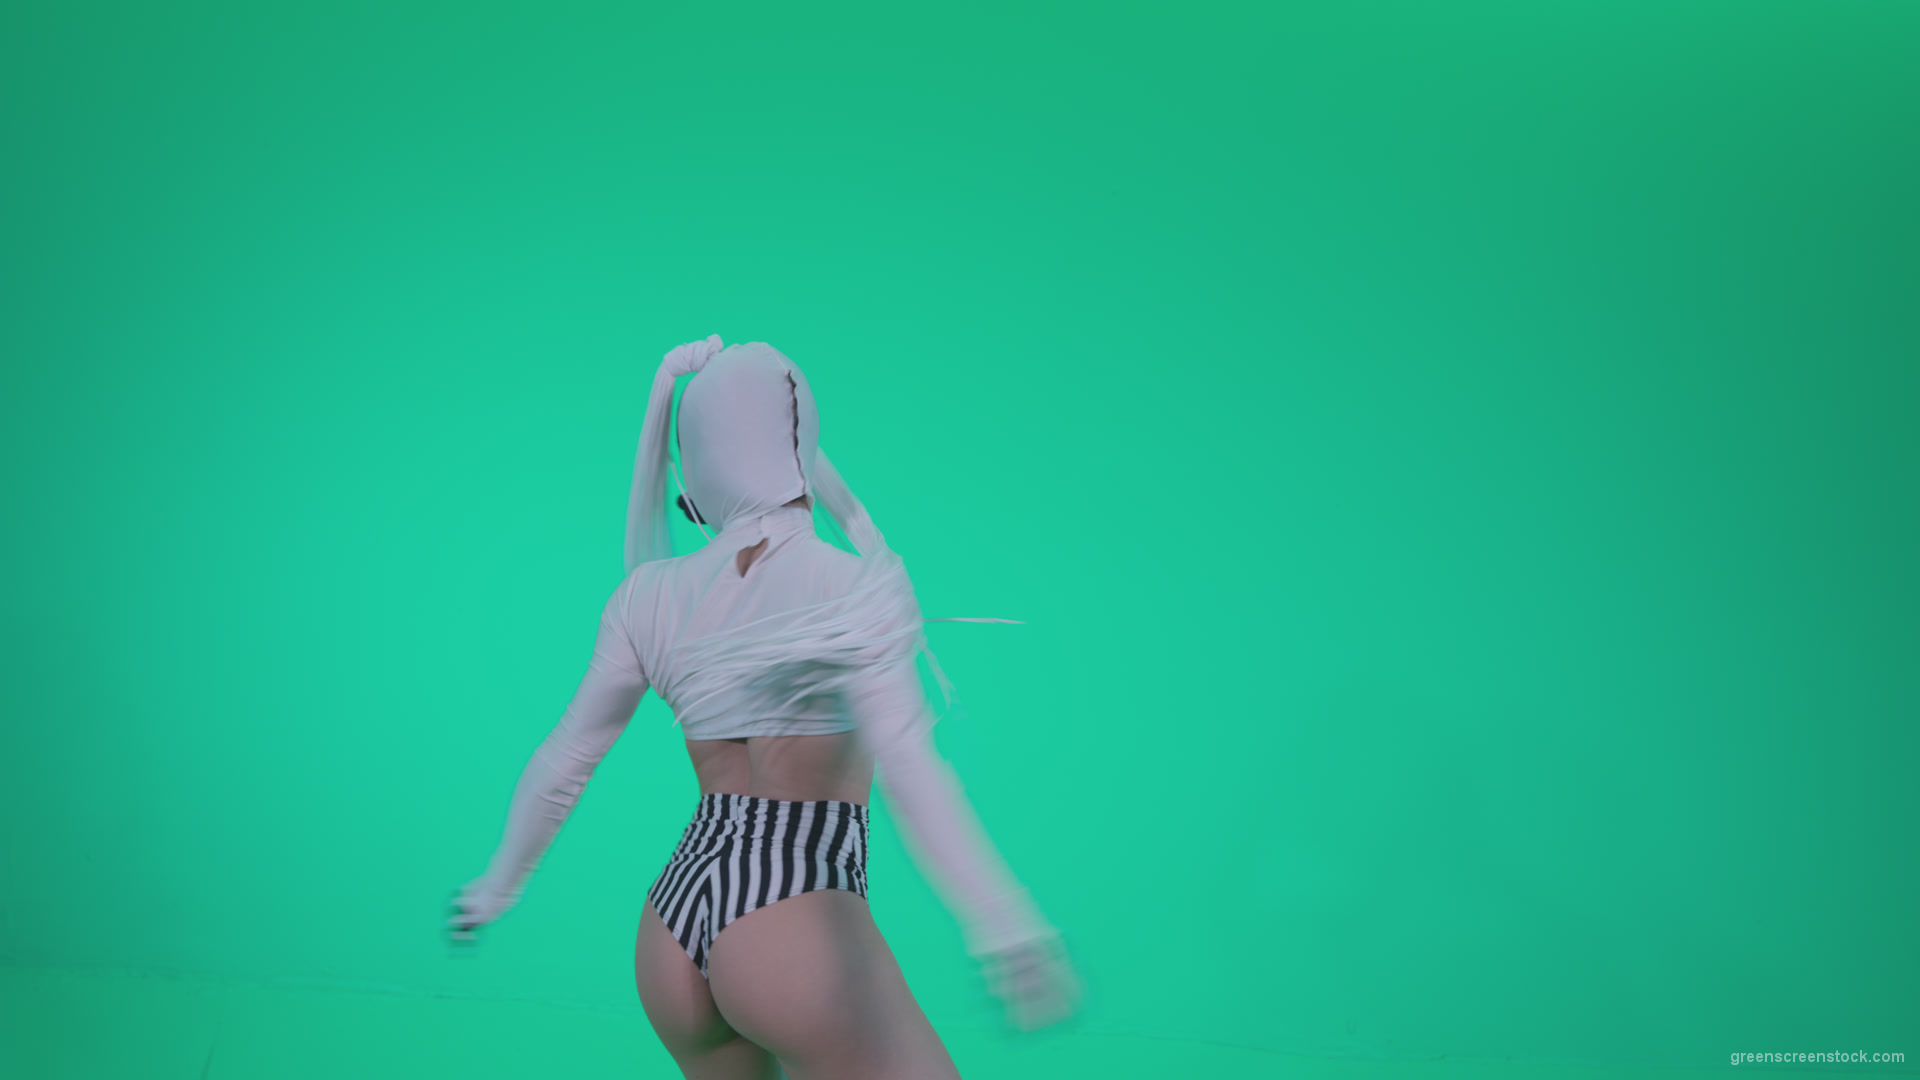 vj video background Go-go-Dancer-with-Latex-Top-t9-Green-Screen-Video-Footage_003